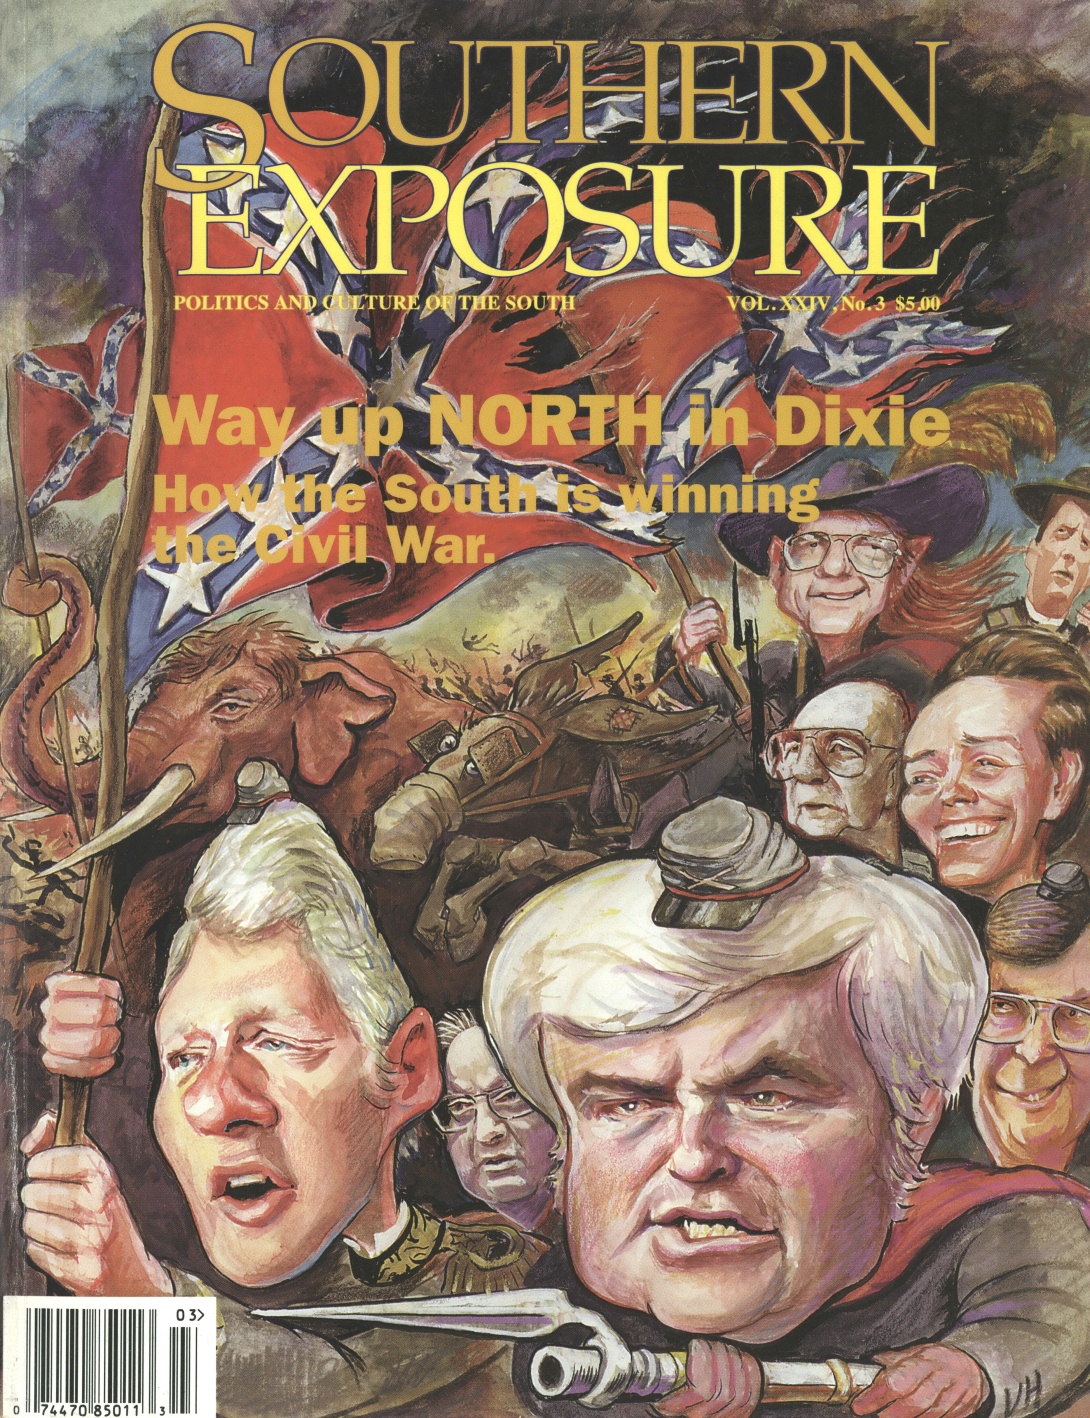 Magazine cover with art of Bill Clinton, Newt Gingrich, other Southern politicians waving Confederate flag and carrying bayonets. Text reads "Way up NORTH in Dixie: How the South is winning the Civil War."